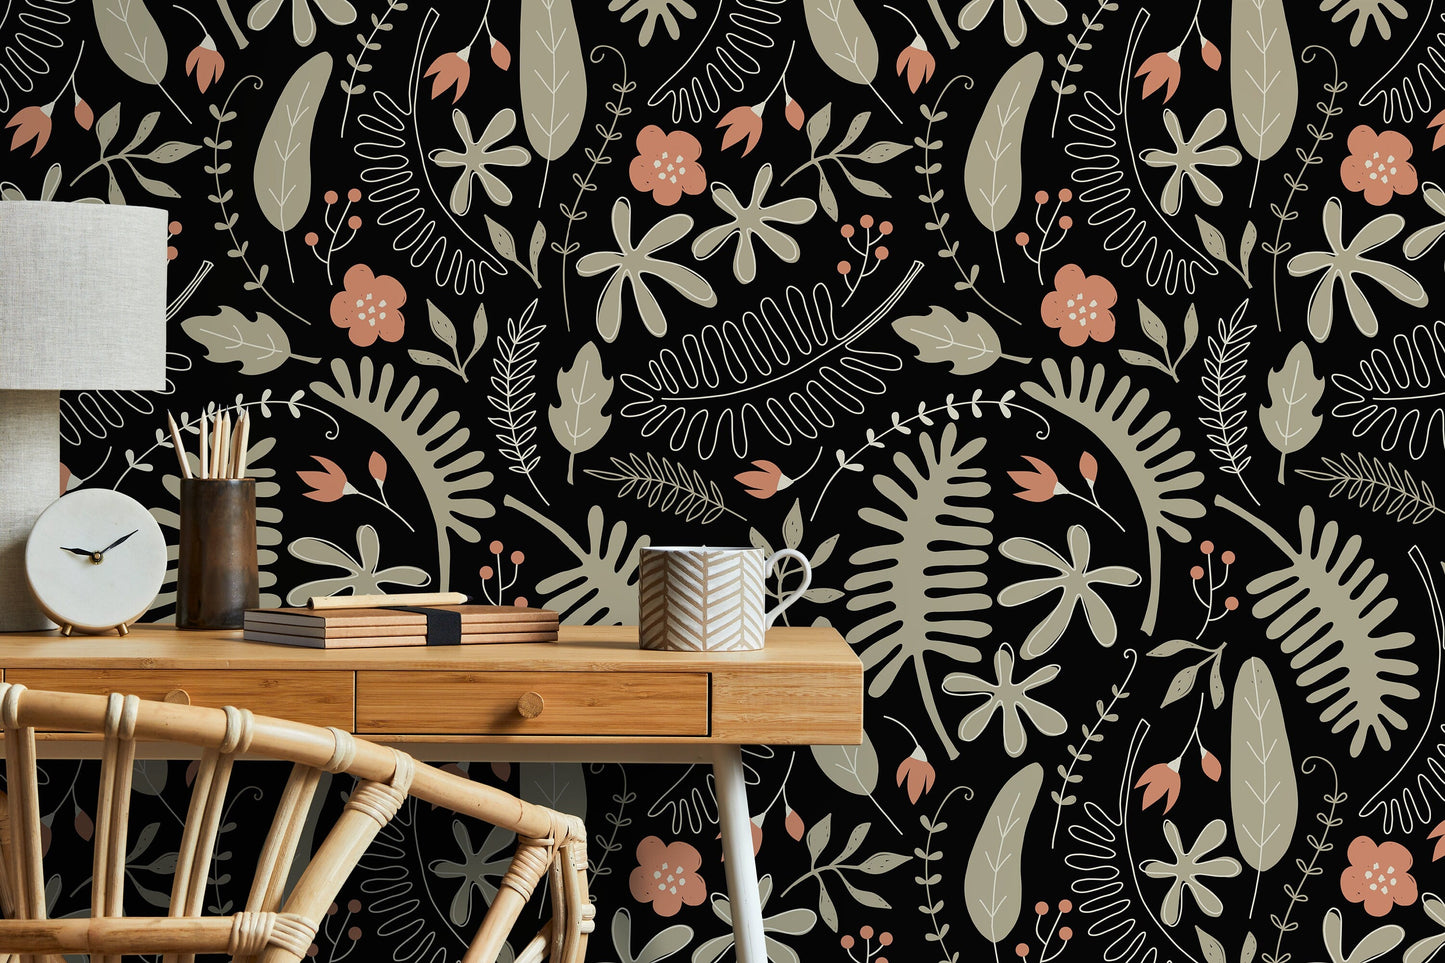 Dark Leaf and Floral Wallpaper / Peel and Stick Wallpaper Removable Wallpaper Home Decor Wall Art Wall Decor Room Decor - D161